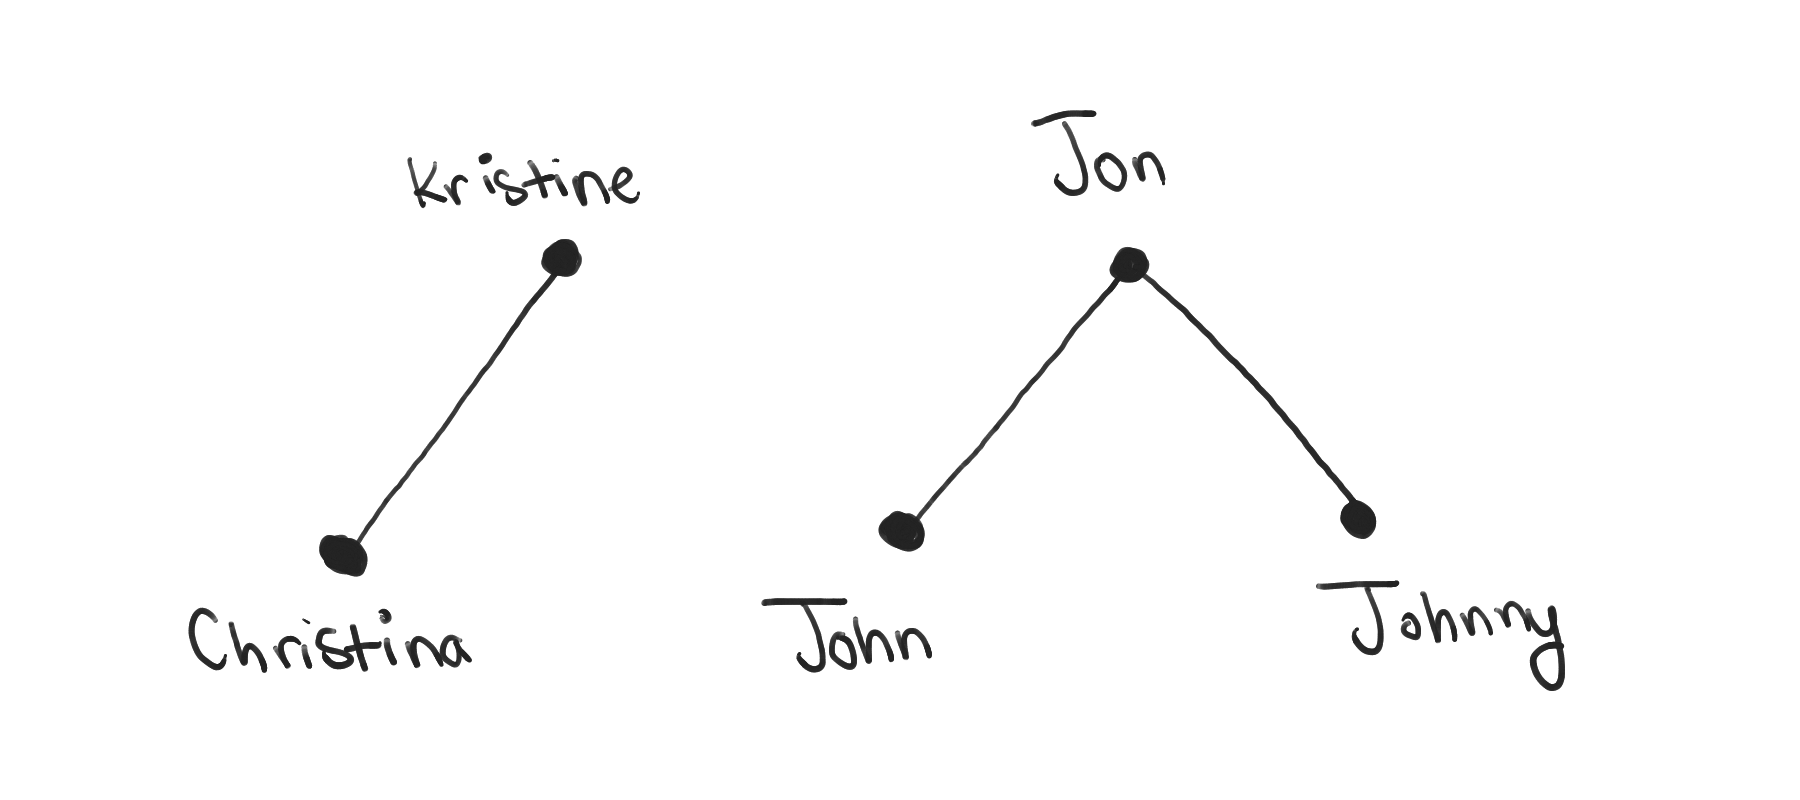 From left to right, five points: "Christina", "Kristine", "John", "Jon", "Johnny". There are lines between "Christina" and "Kristine", "John" and "Jon", "Jon" and "Johnny".